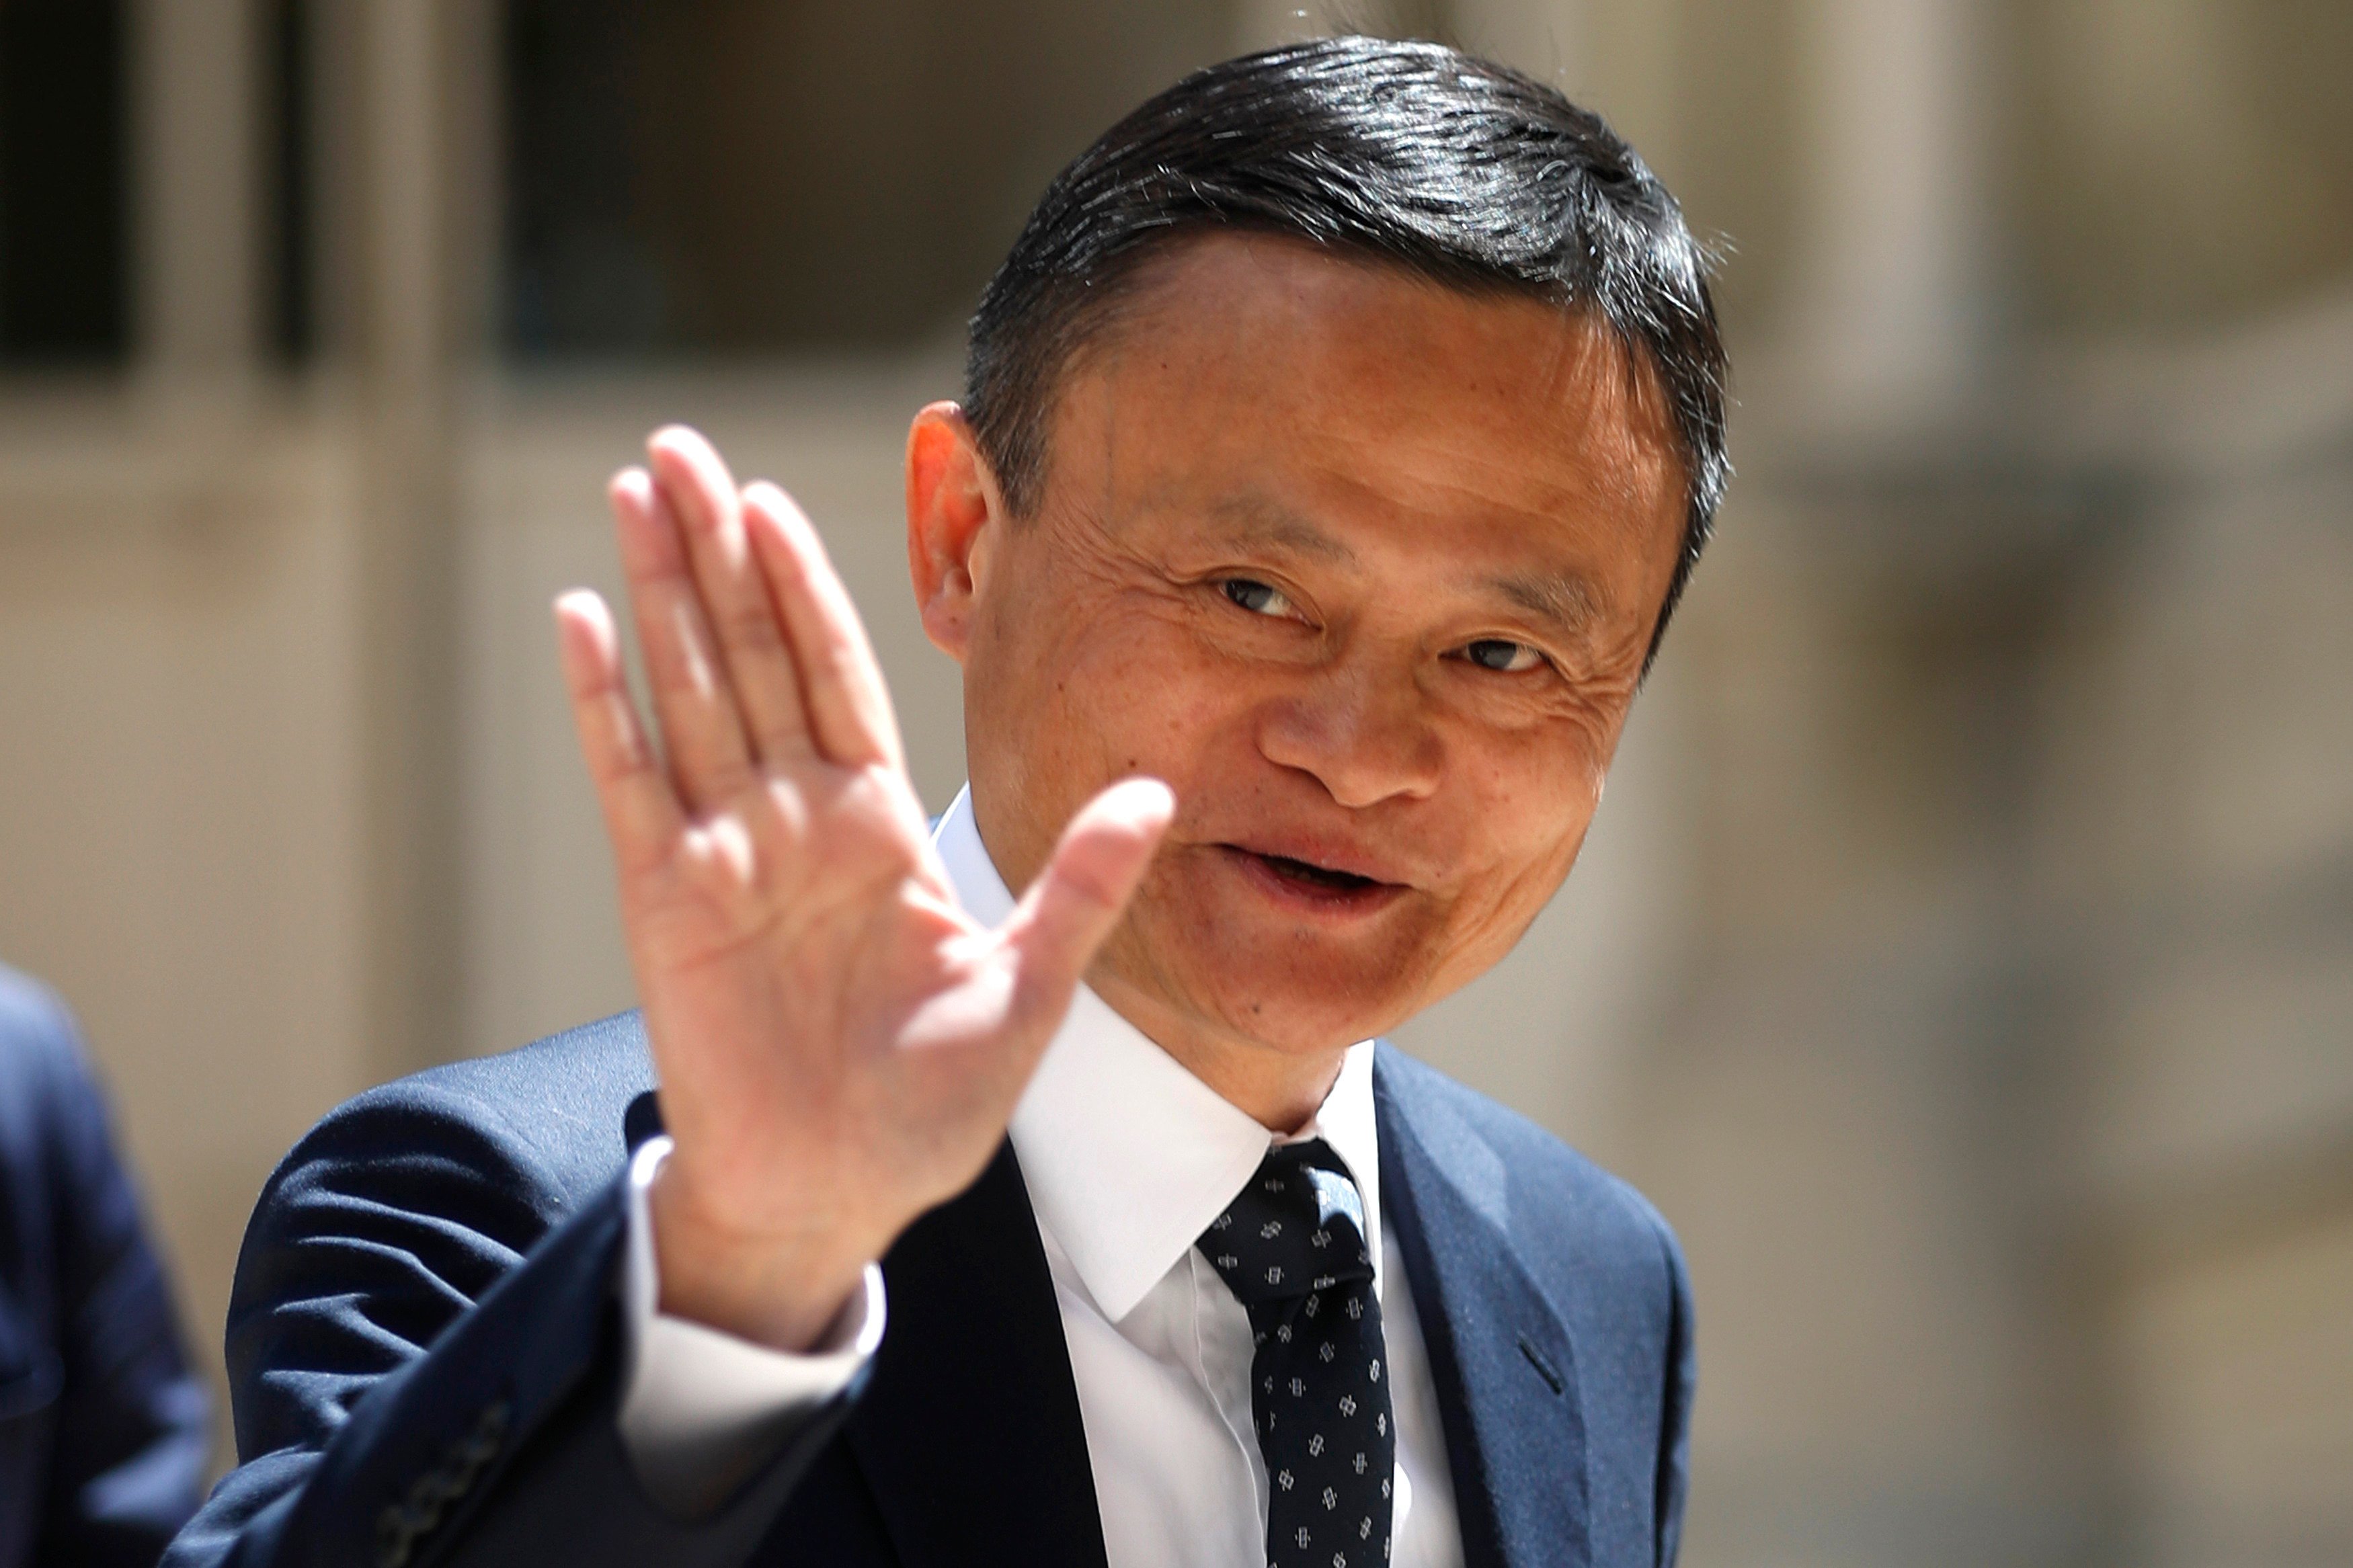 Jack Ma, founder of Alibaba group, is spending the Lunar New Year holiday in Hong Kong, according to people close to him. Photo: AP